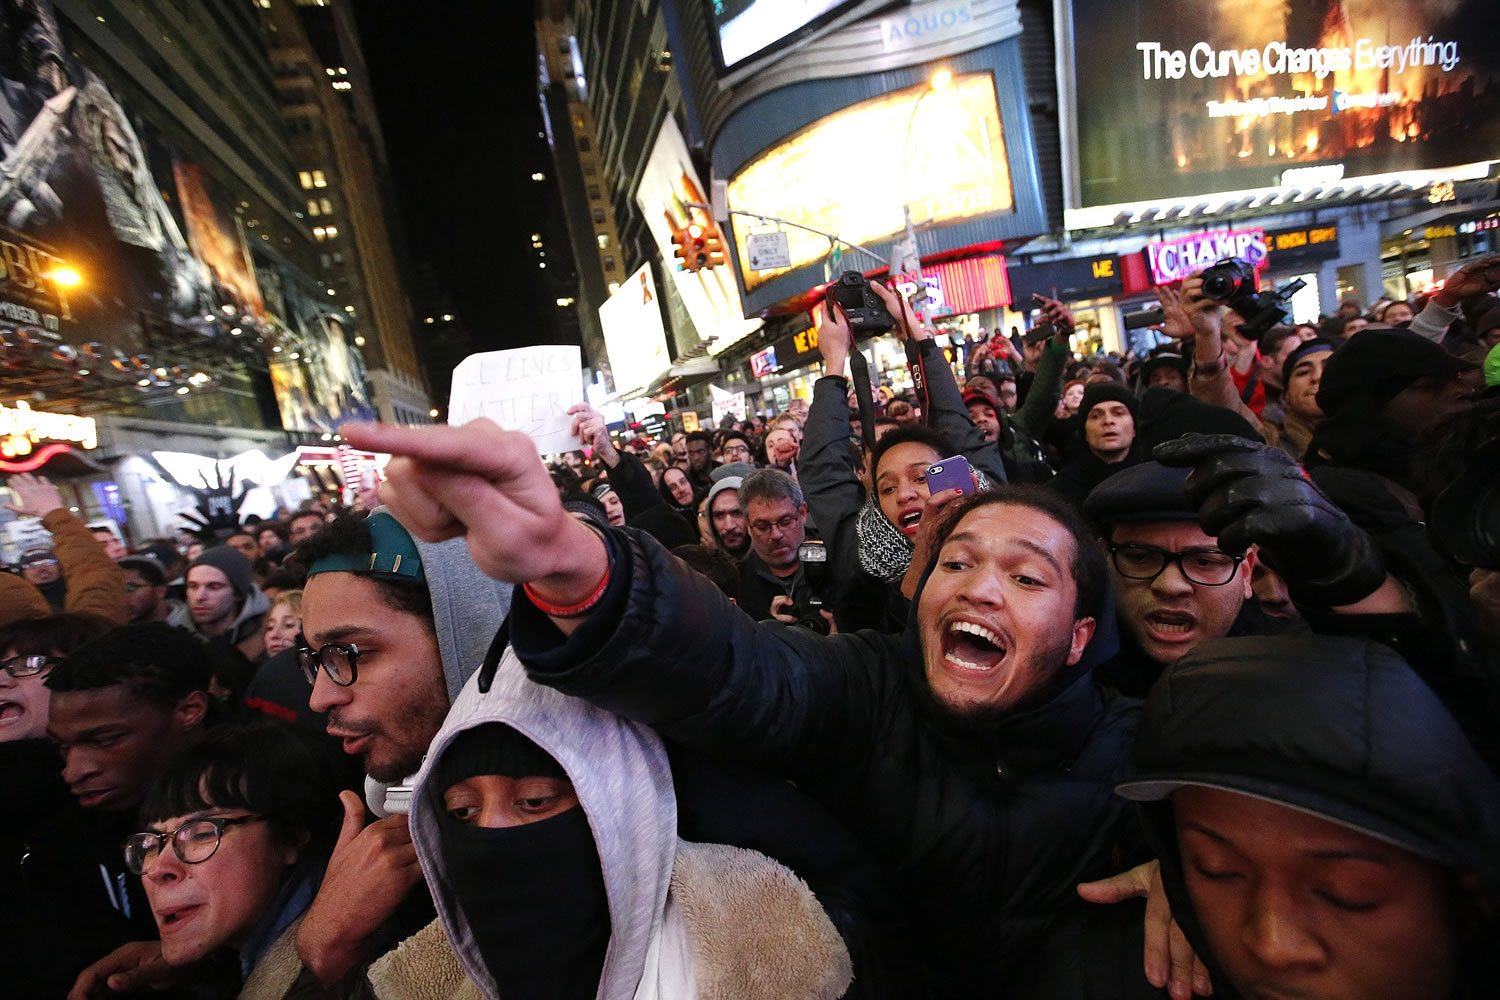 Protesters rallying against a grand jury's decision not to indict the police officer involved in the death of Eric Garner confront police as they attempt to block traffic Thursday near Times Square in New York.